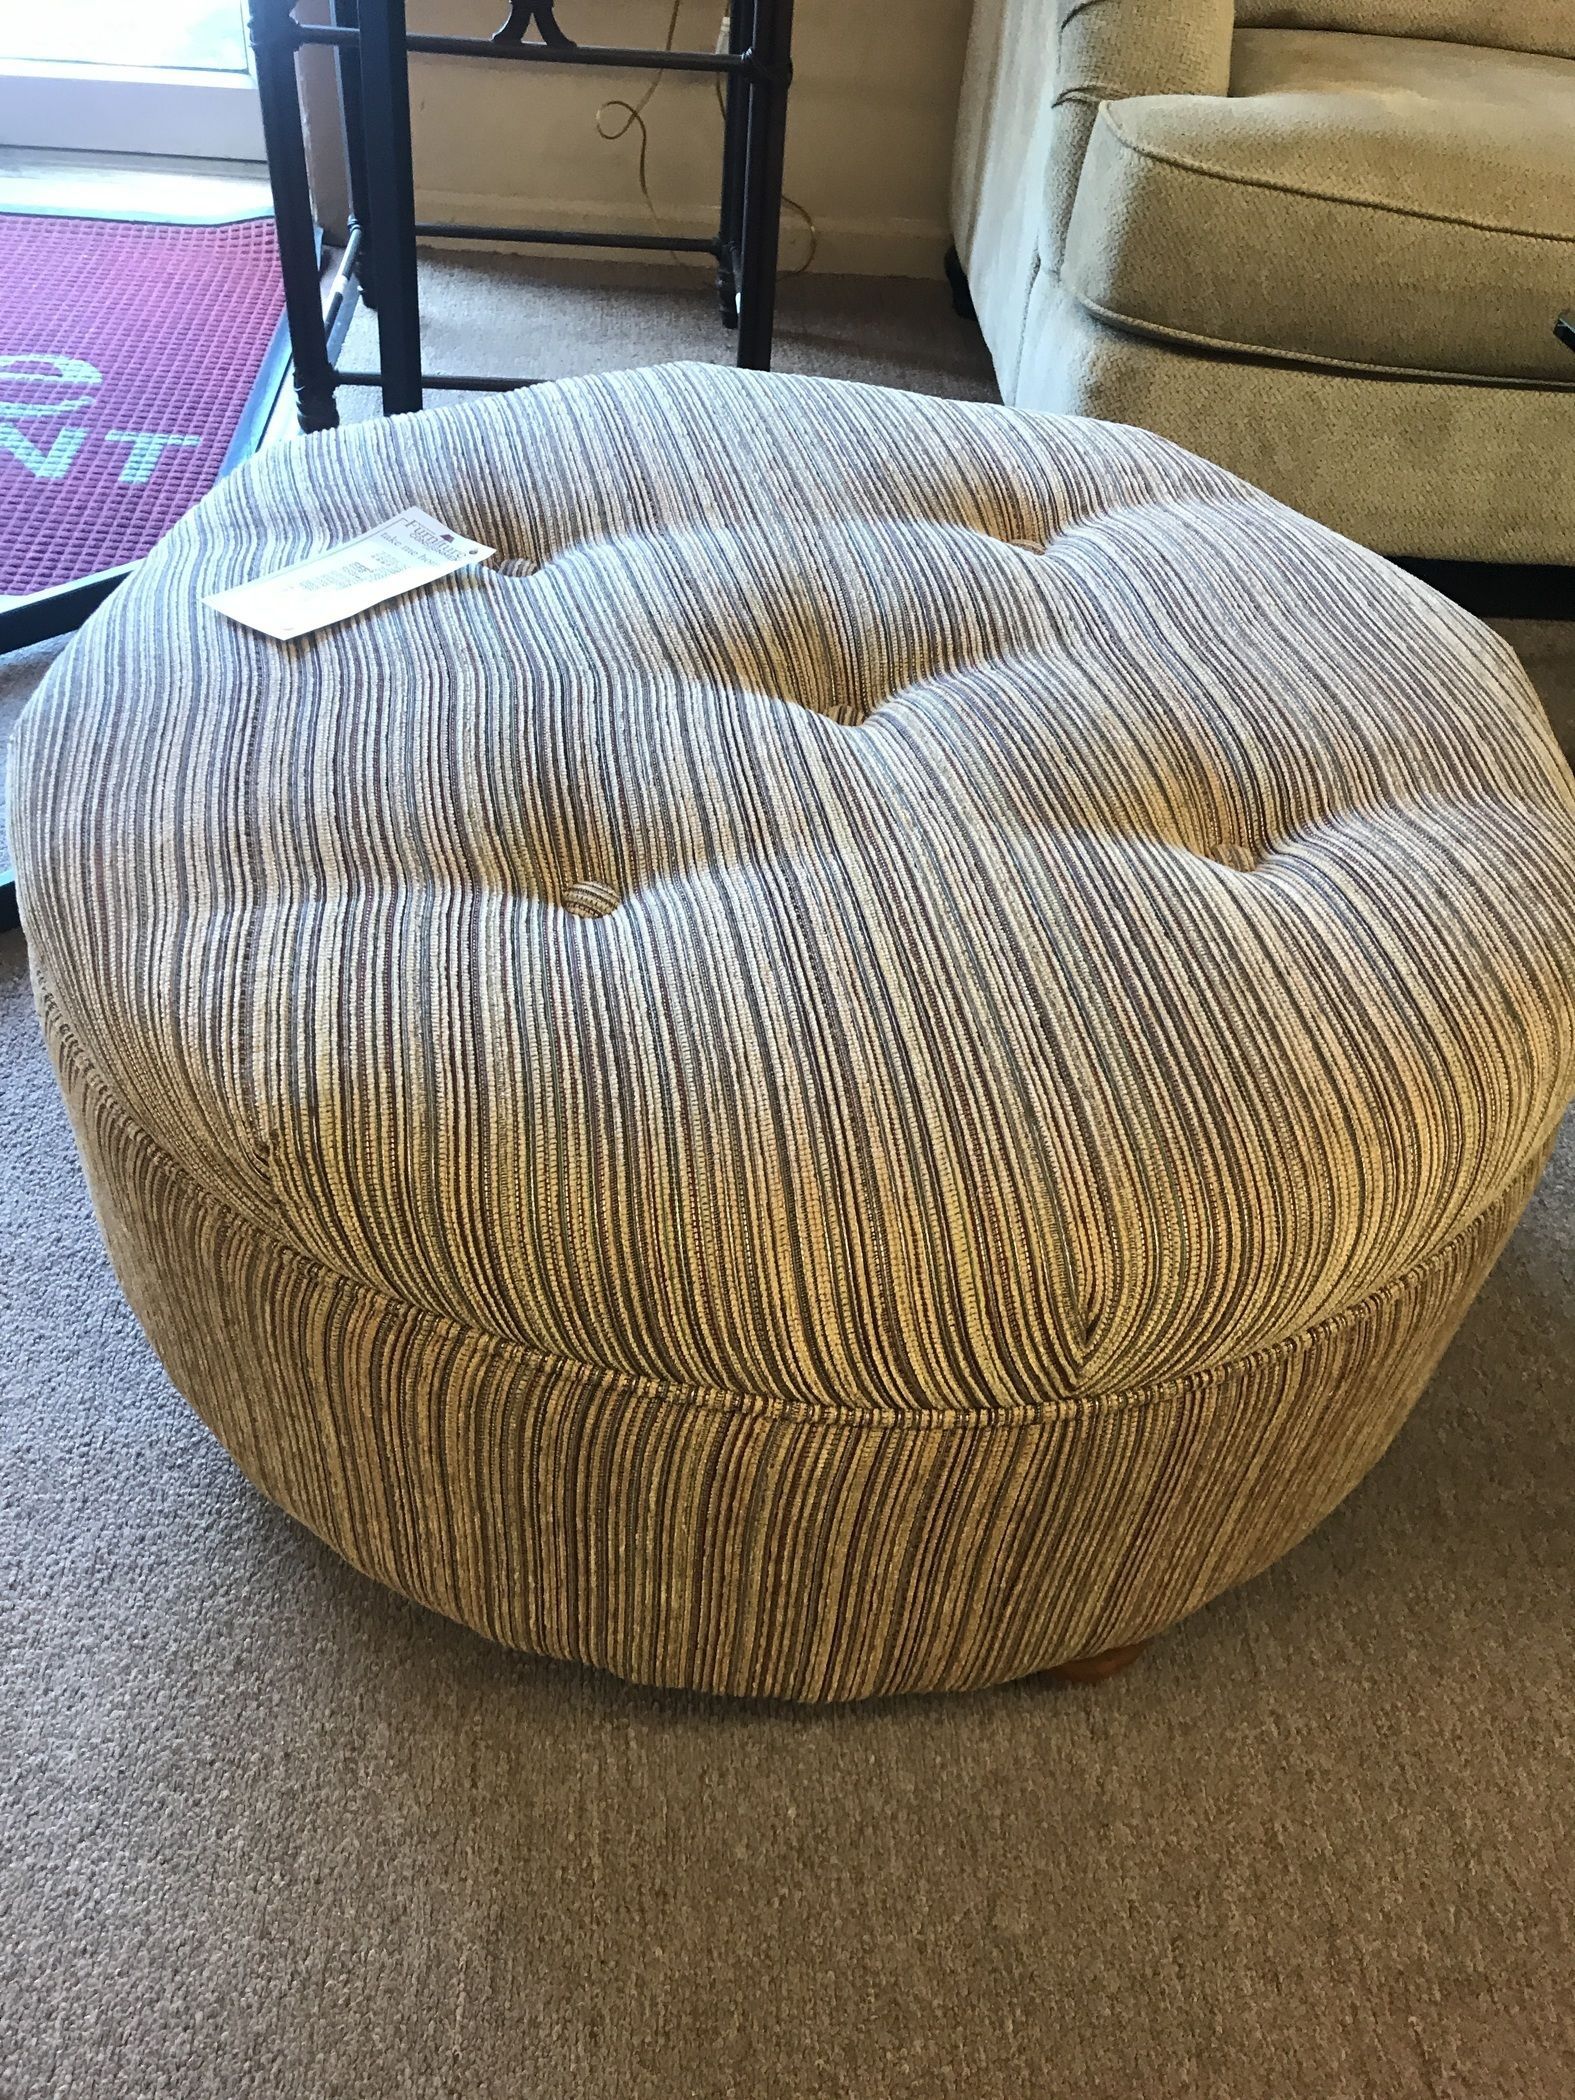 Tufted Round Fabric Ottoman | Delmarva Furniture Consignment With Regard To Tufted Fabric Ottomans (View 13 of 20)